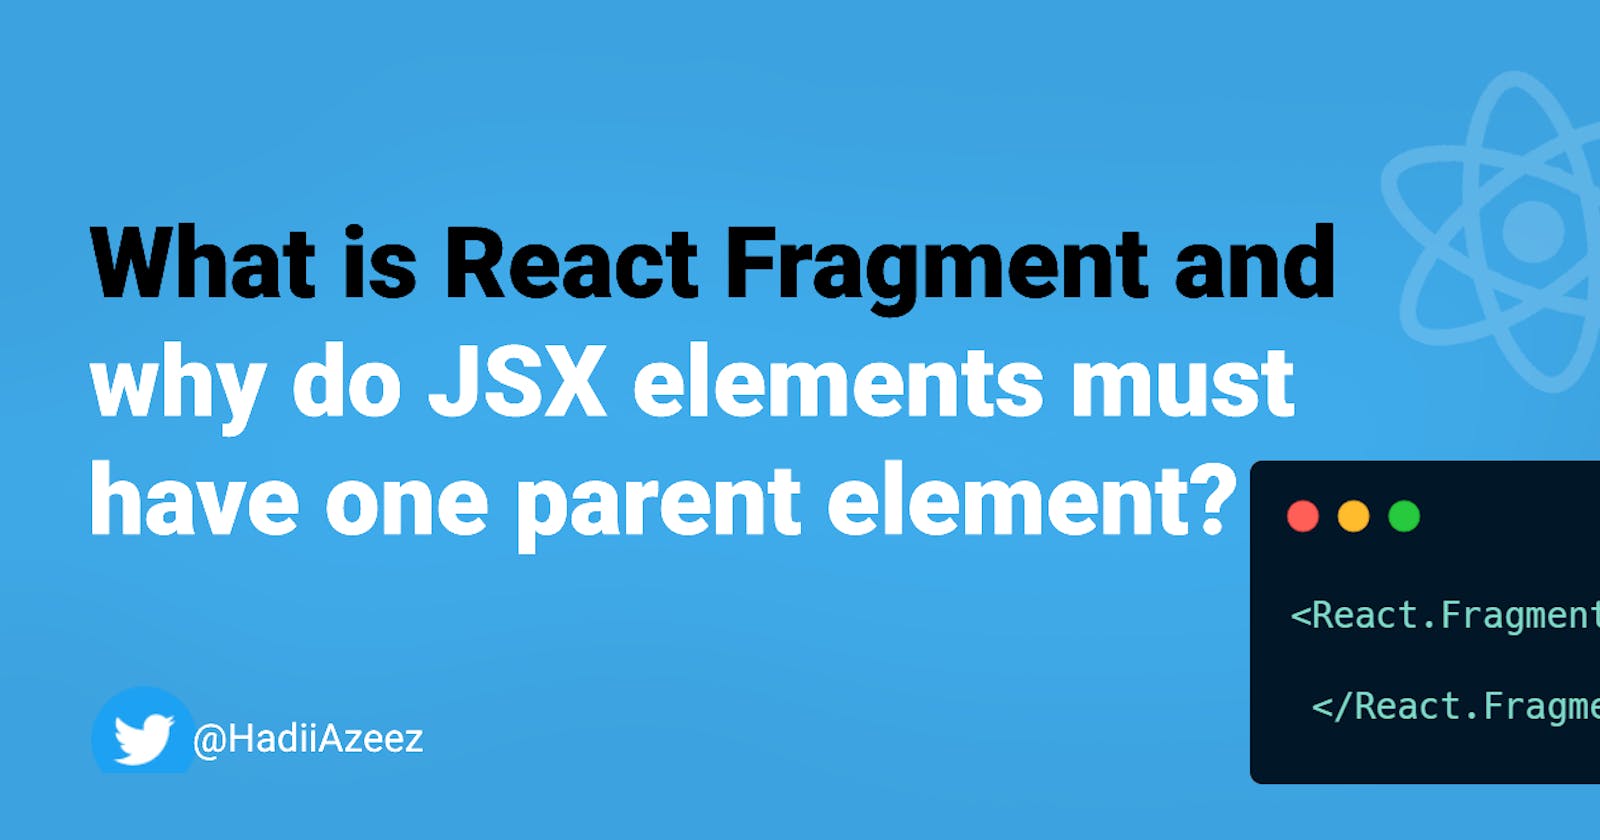 What is React Fragment and why do JSX elements must have one parent element?